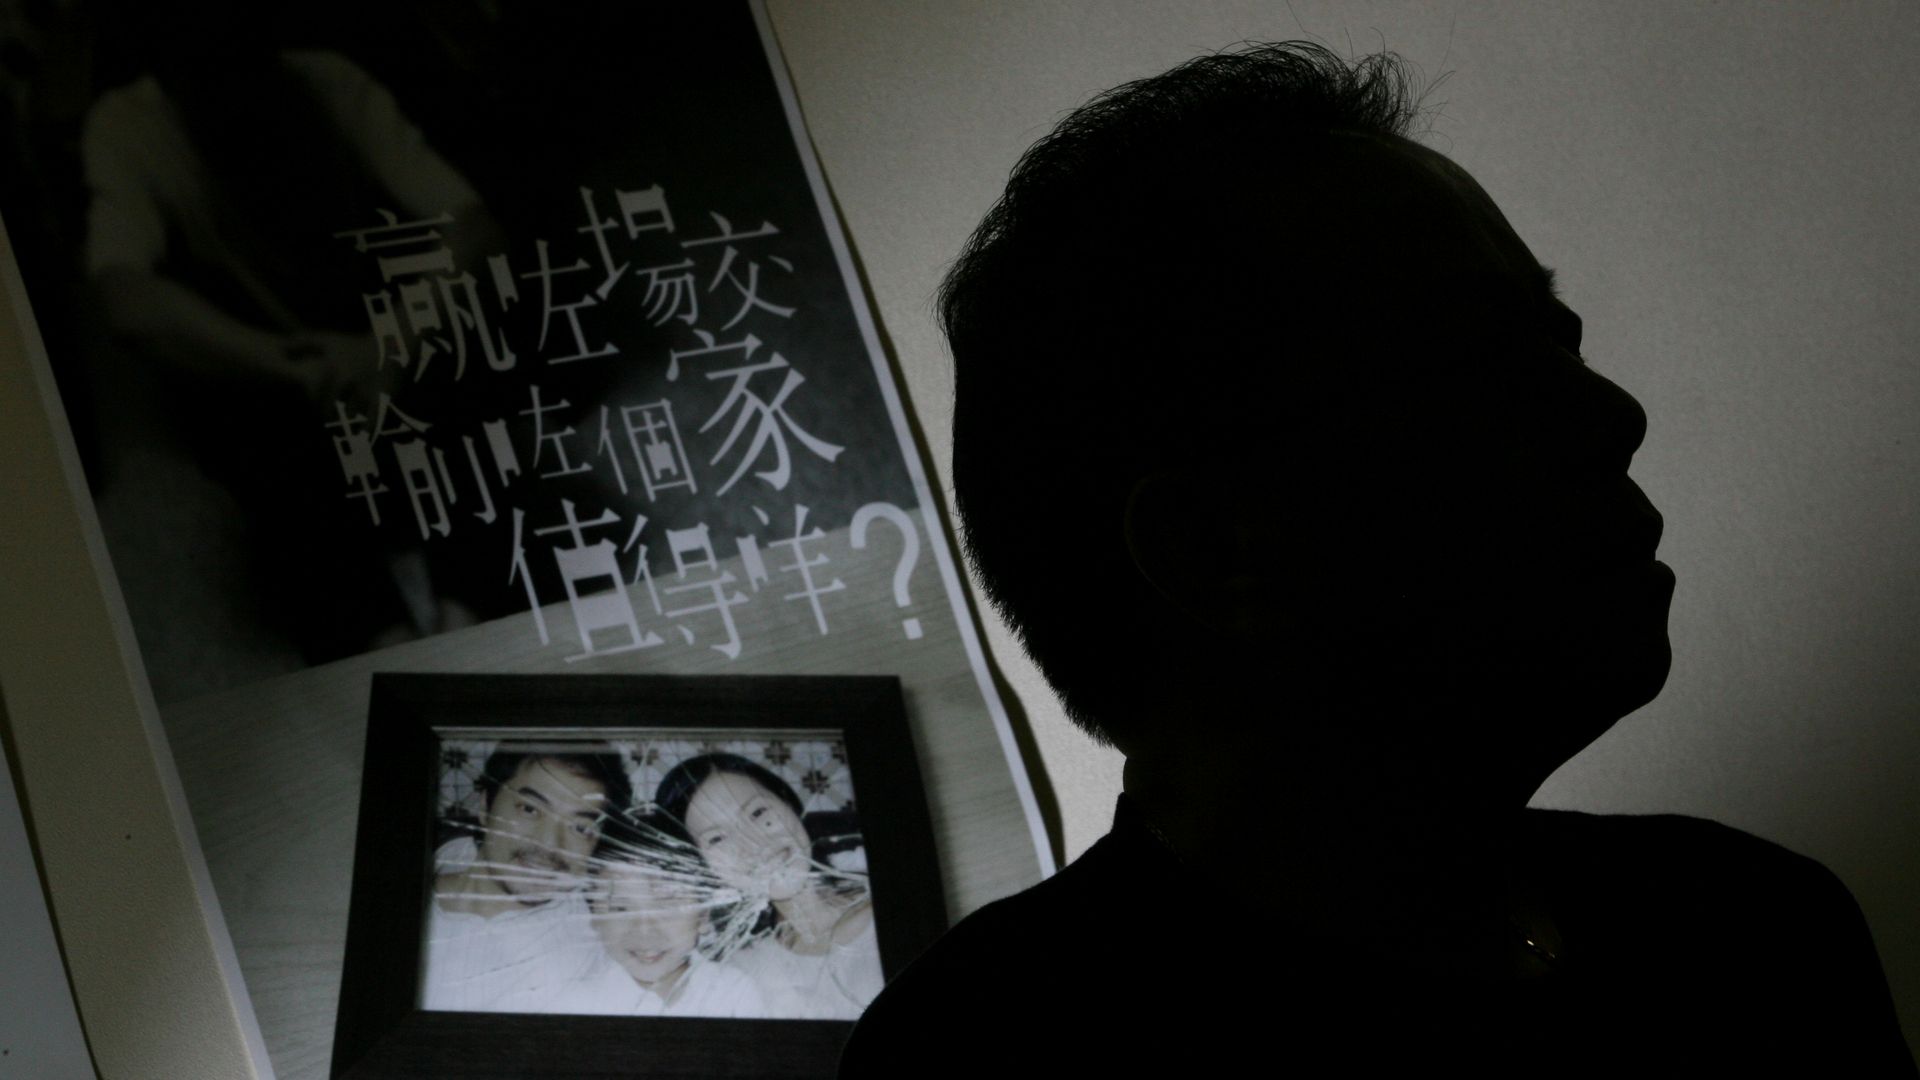 A silhouette of a Chinese man who used to be a domestic abuser